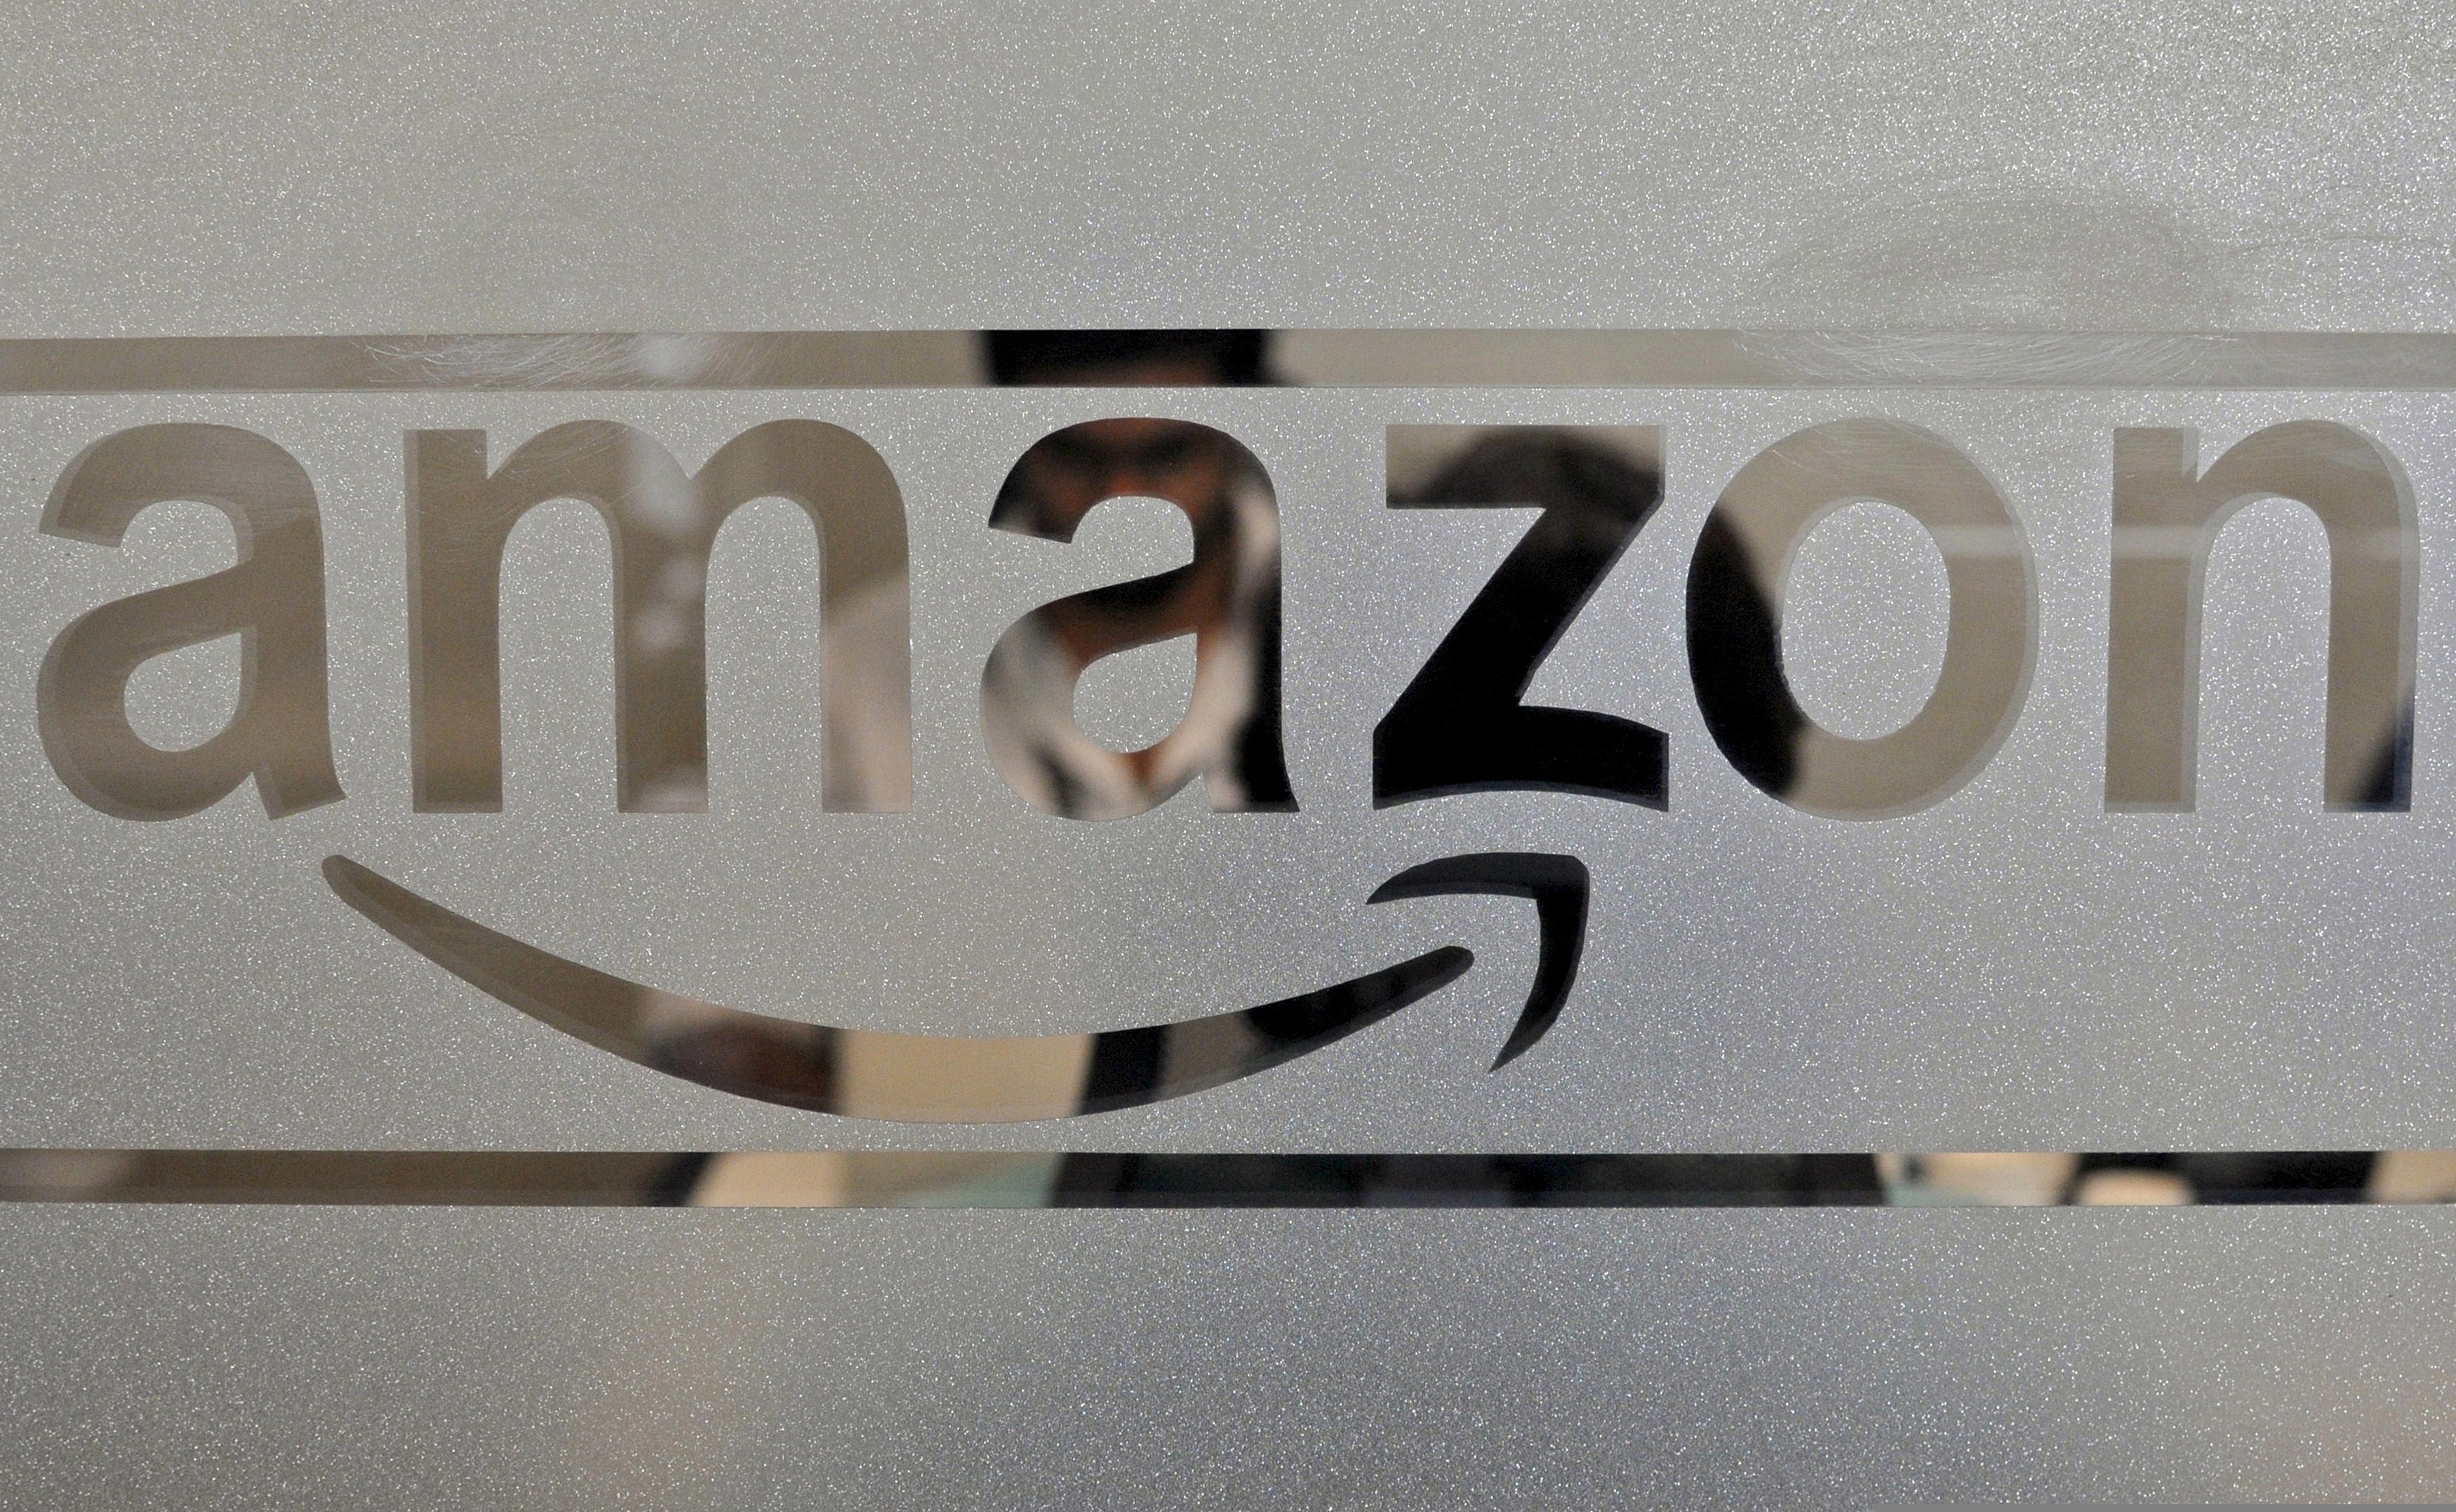 Amazon India to expand private-label brands in fashion to take on rivals